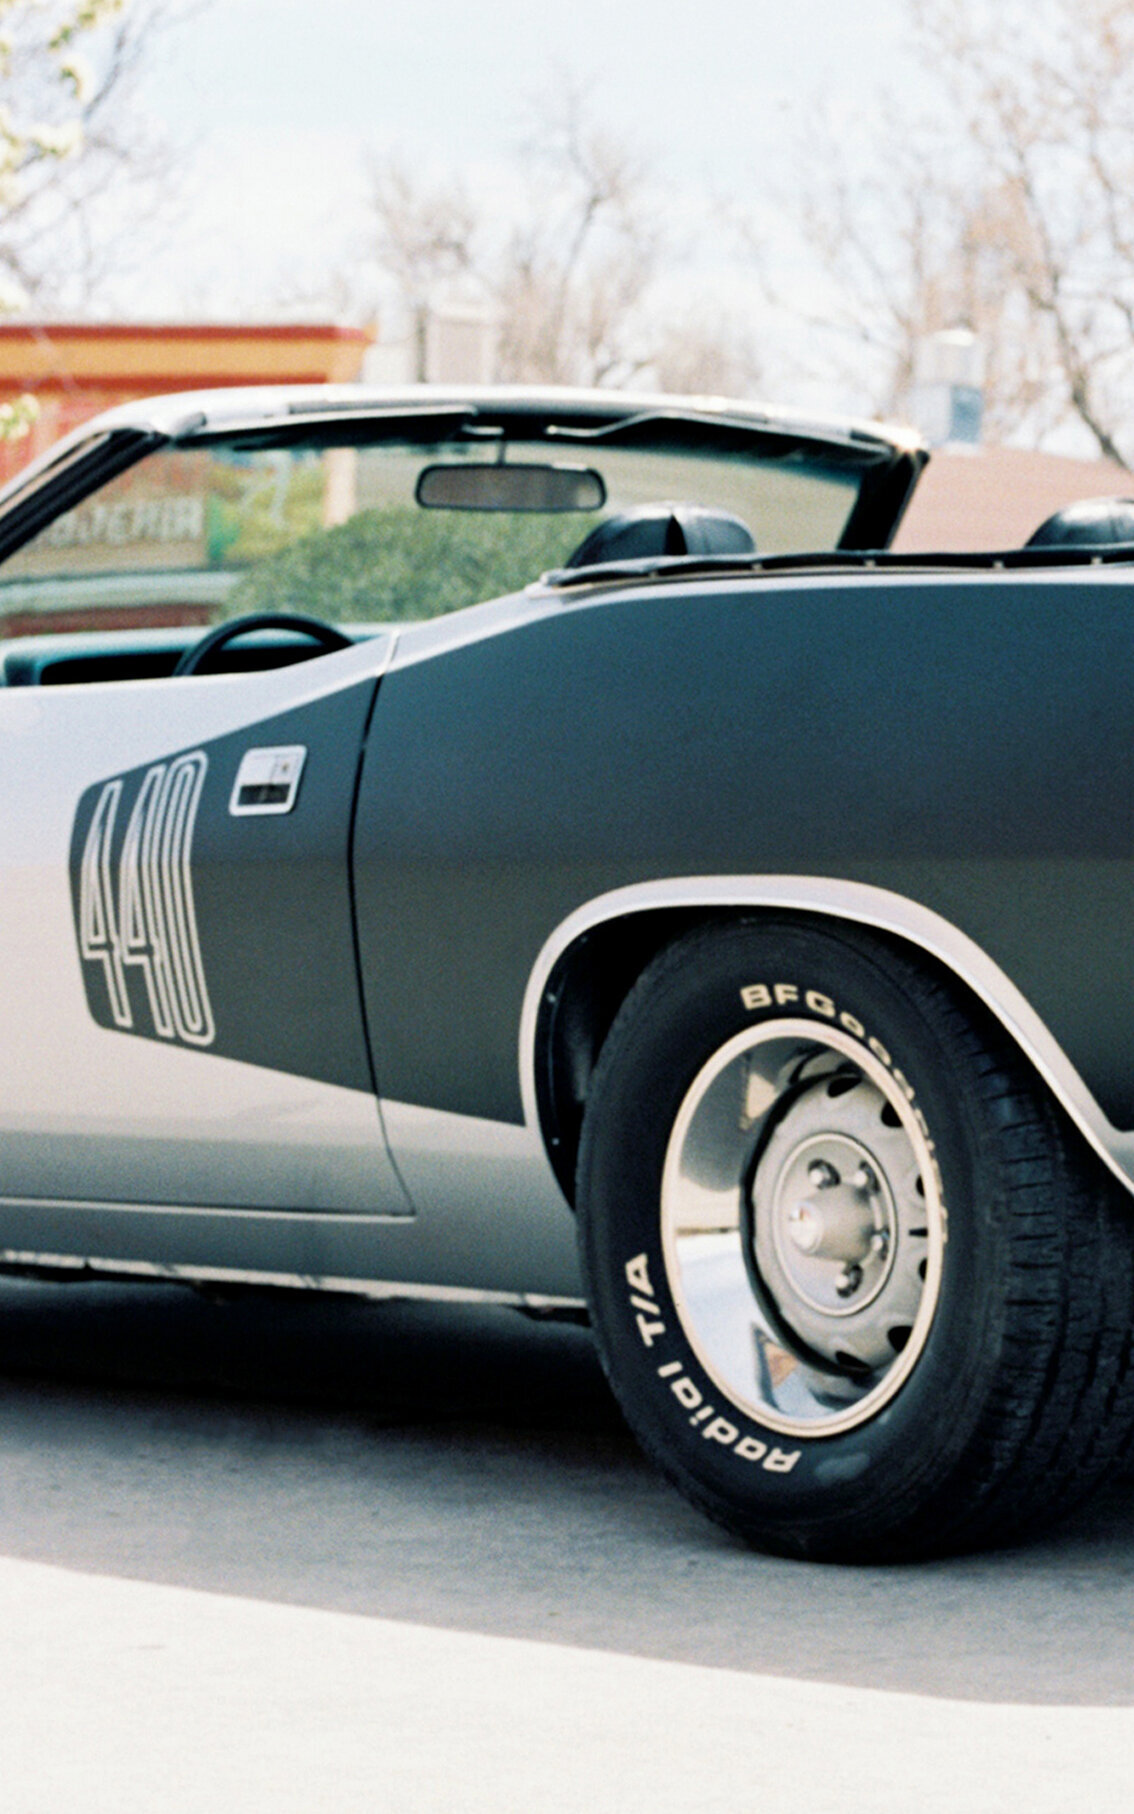 1970 Plymouth Cuda Homepage Image 01 mobile